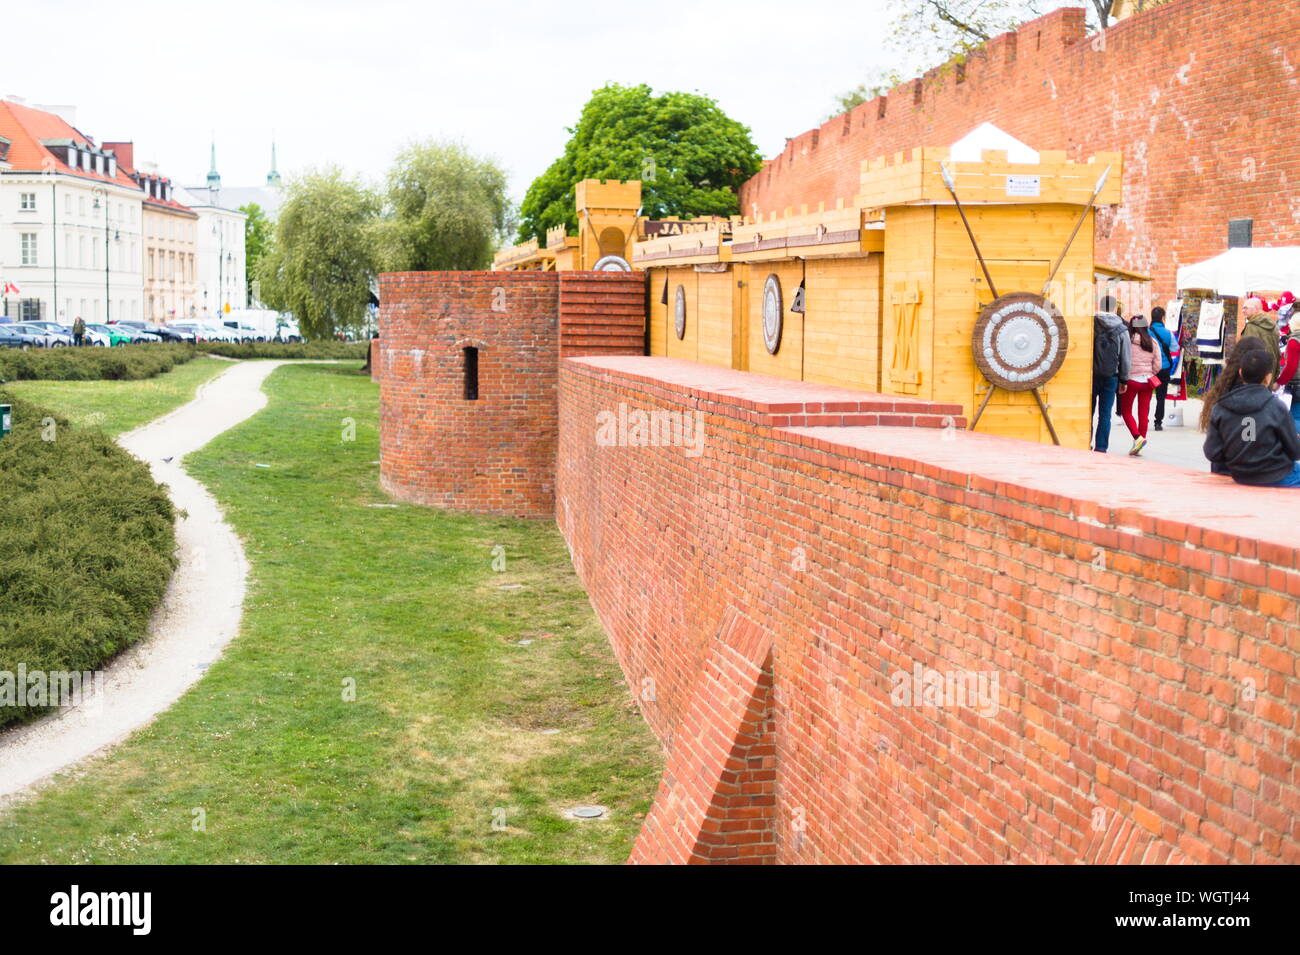 The defensive walls and fortifications of Warsaw's old town. Stock Photo